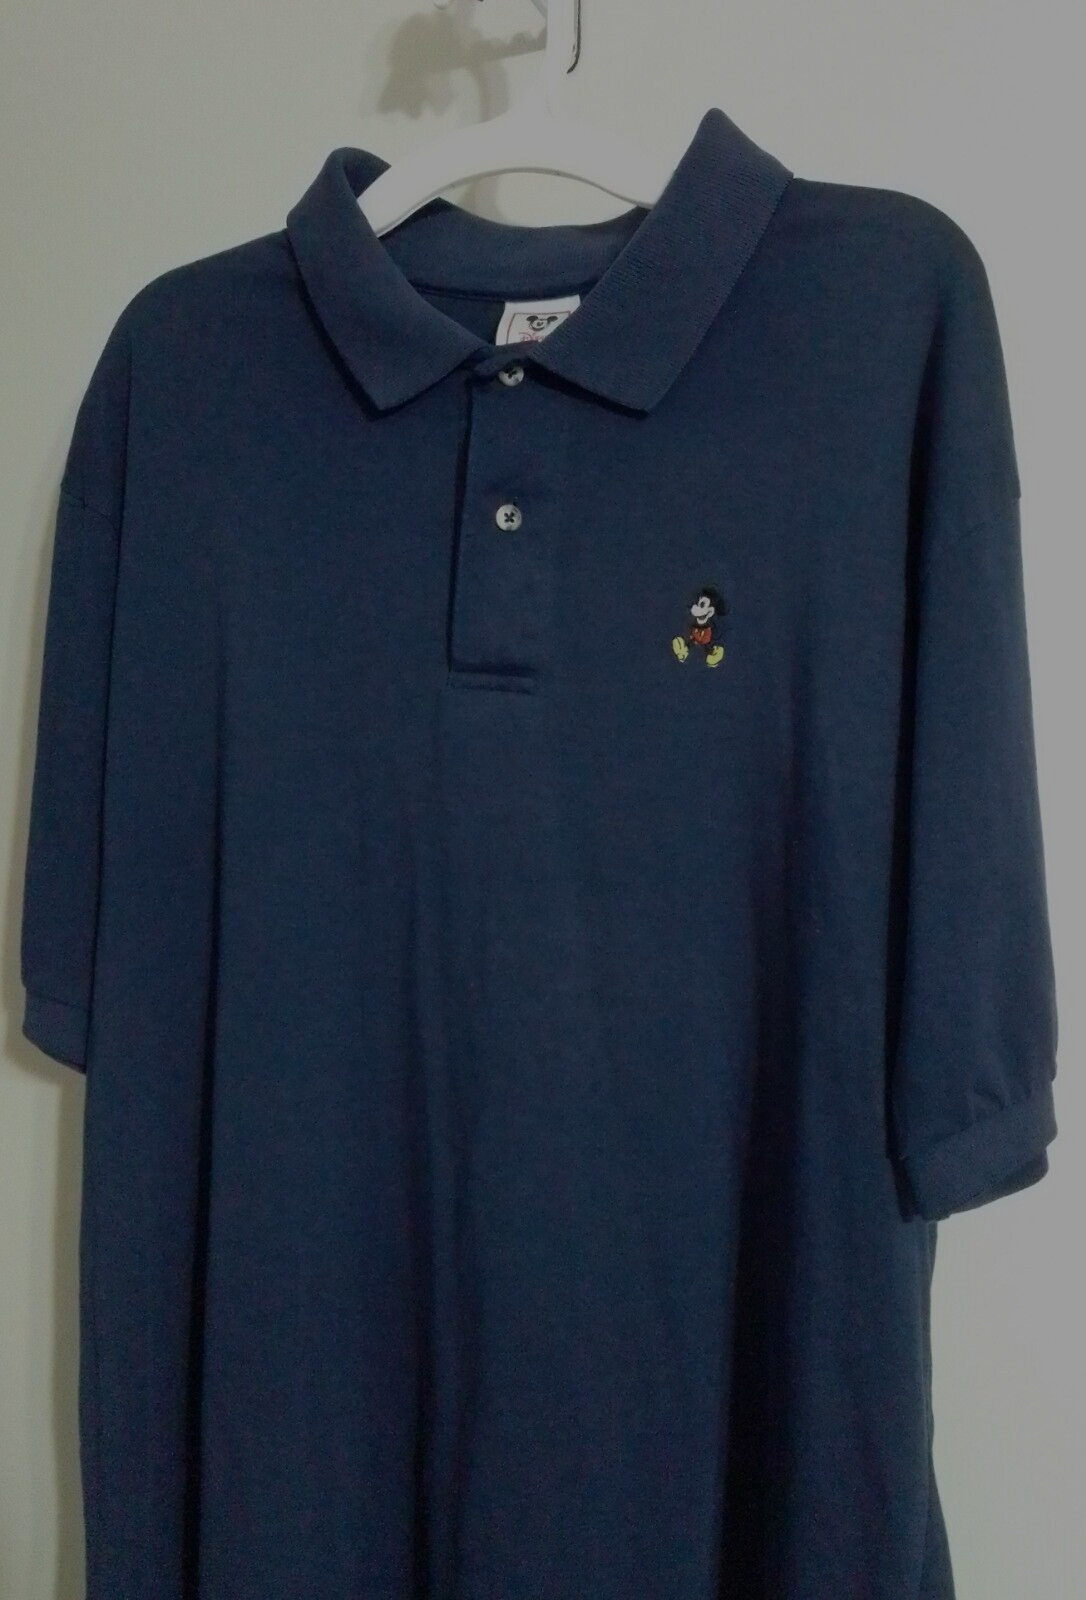 Disney Wear Navy Blue Polo Shirt Embroidered Mickey Mouse Mens XL